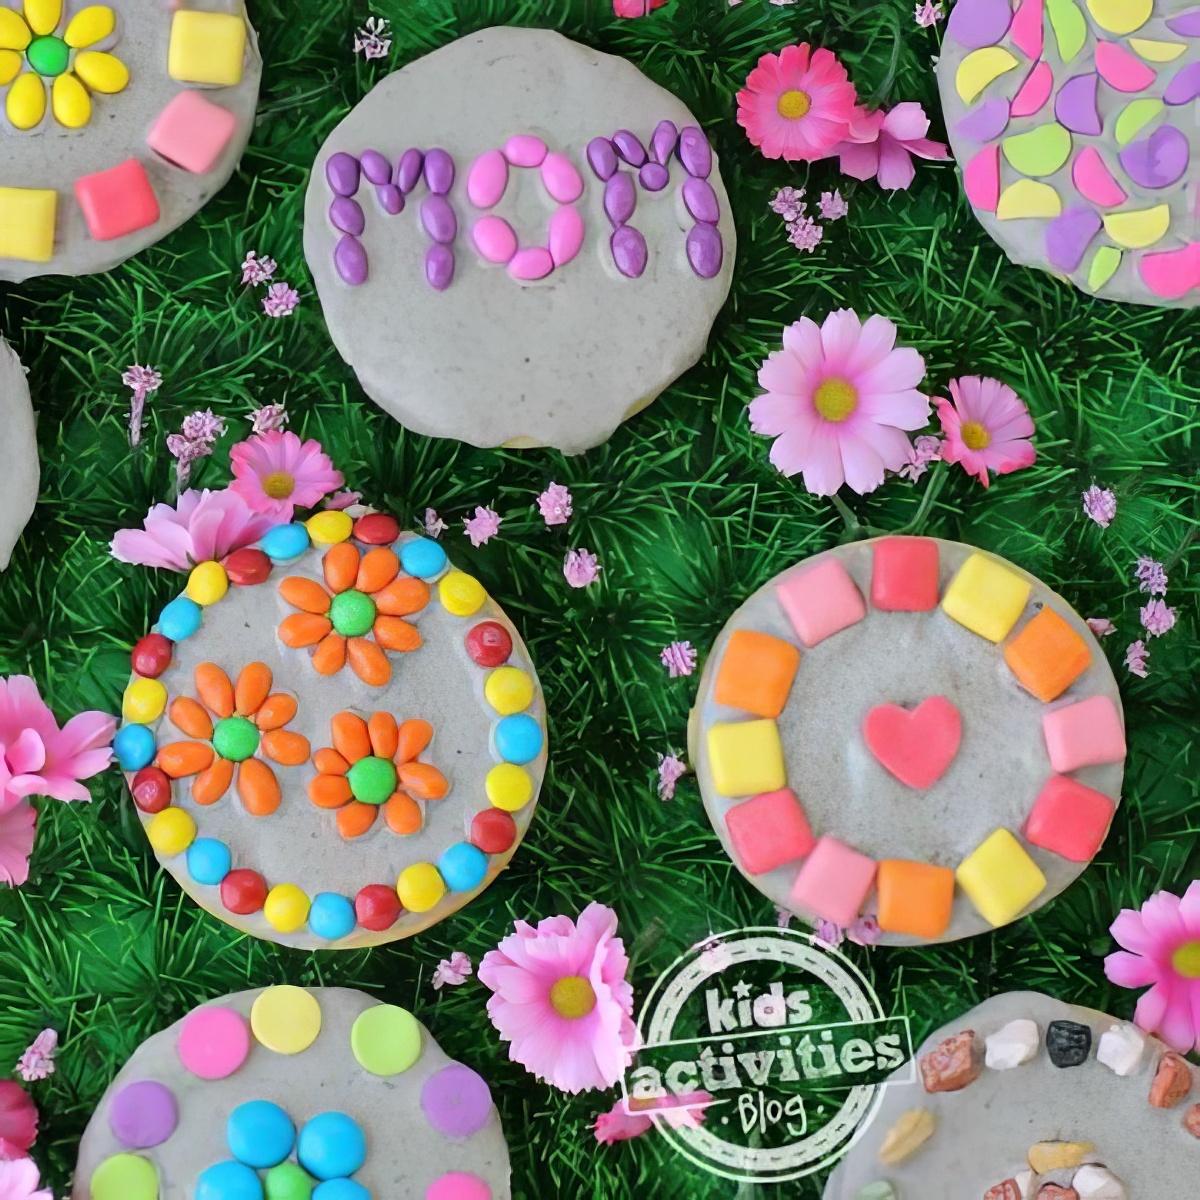 Be clever and have fun putting colors on these garden cookie candies with your kids!